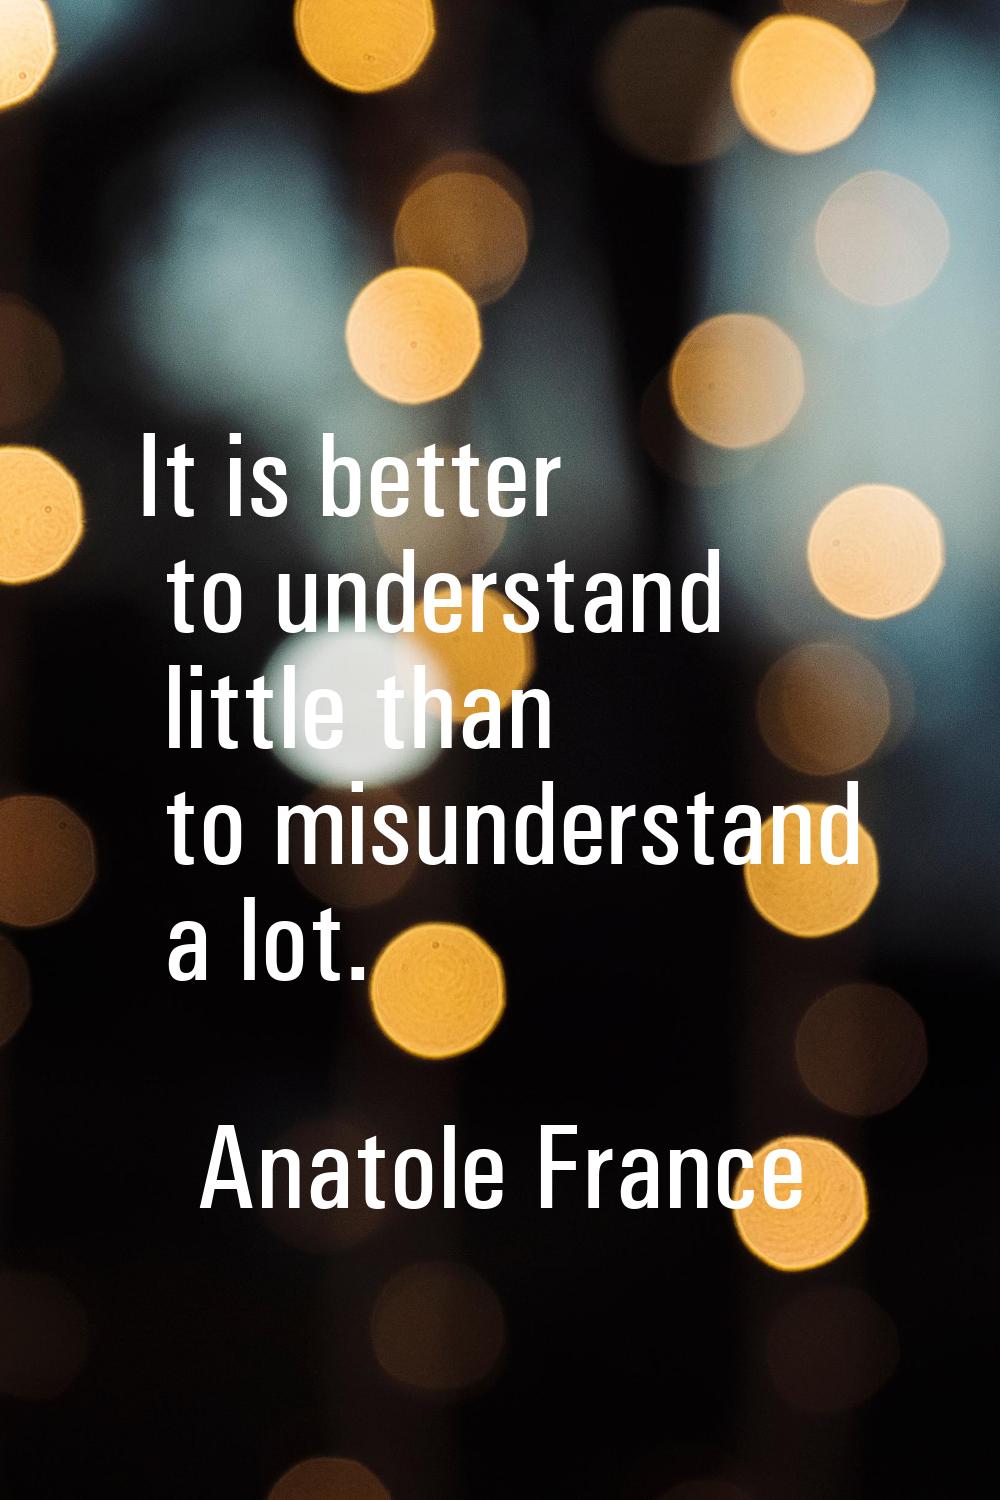 It is better to understand little than to misunderstand a lot.